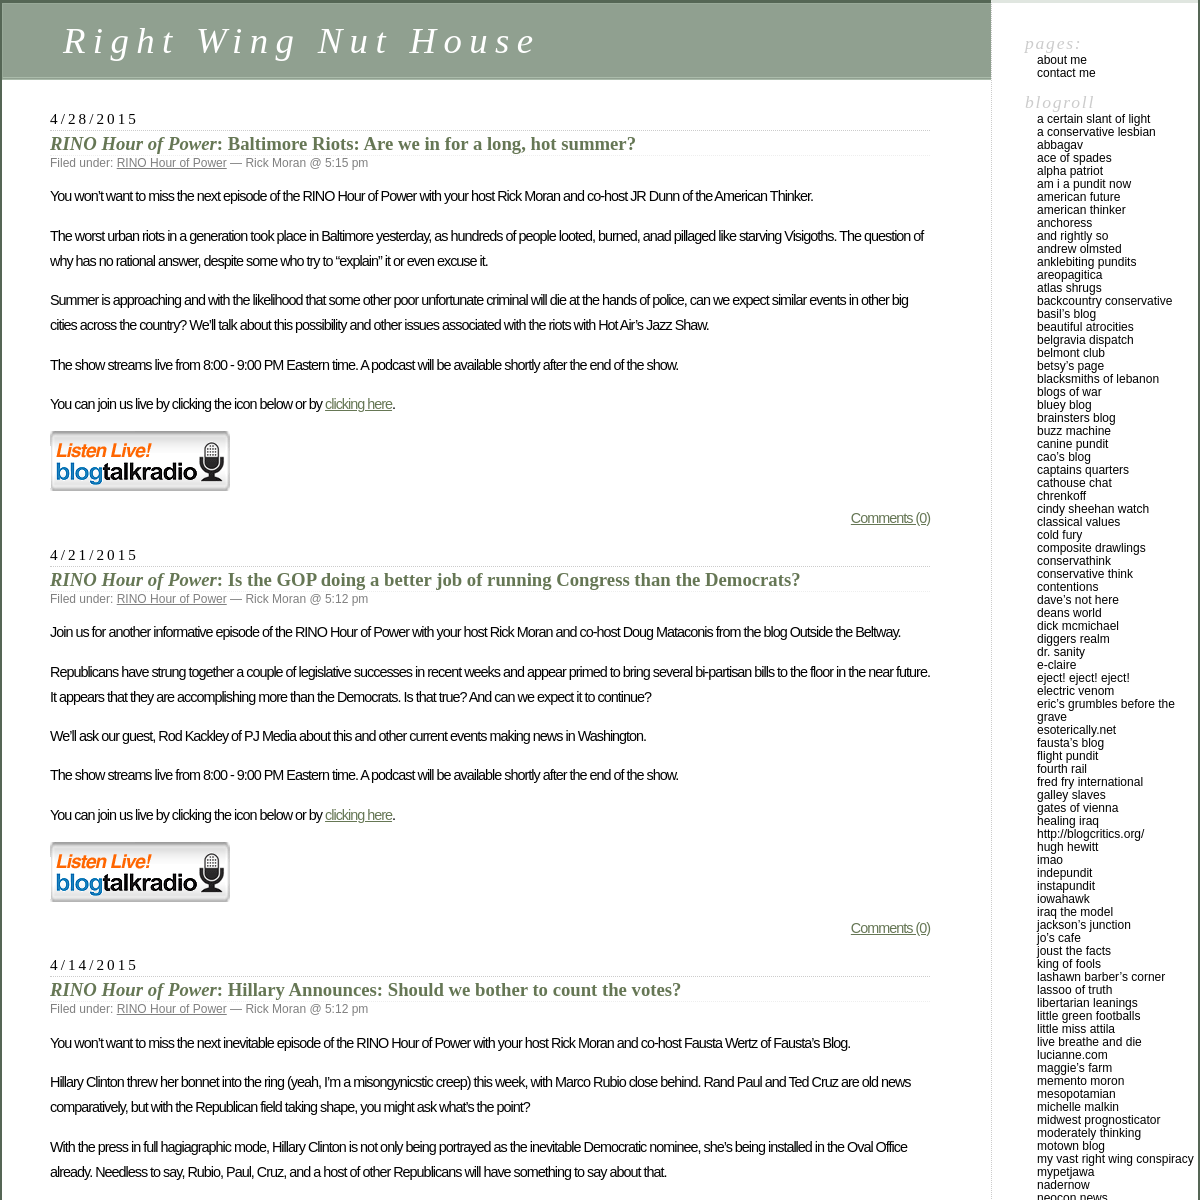 A complete backup of rightwingnuthouse.com